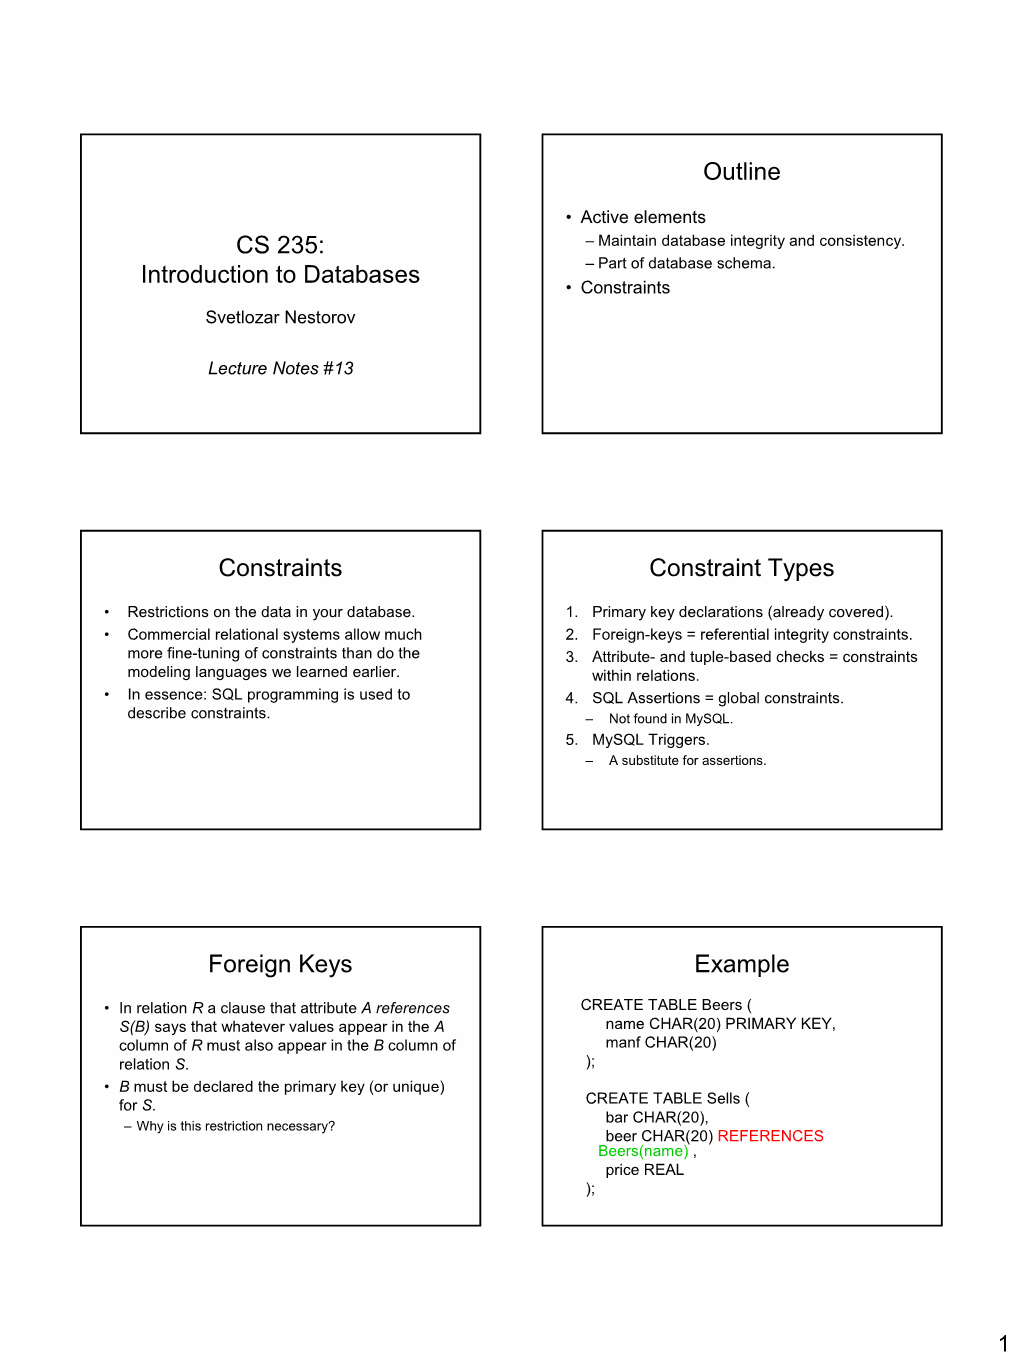 CS 235: Introduction to Databases Outline Constraints Constraint